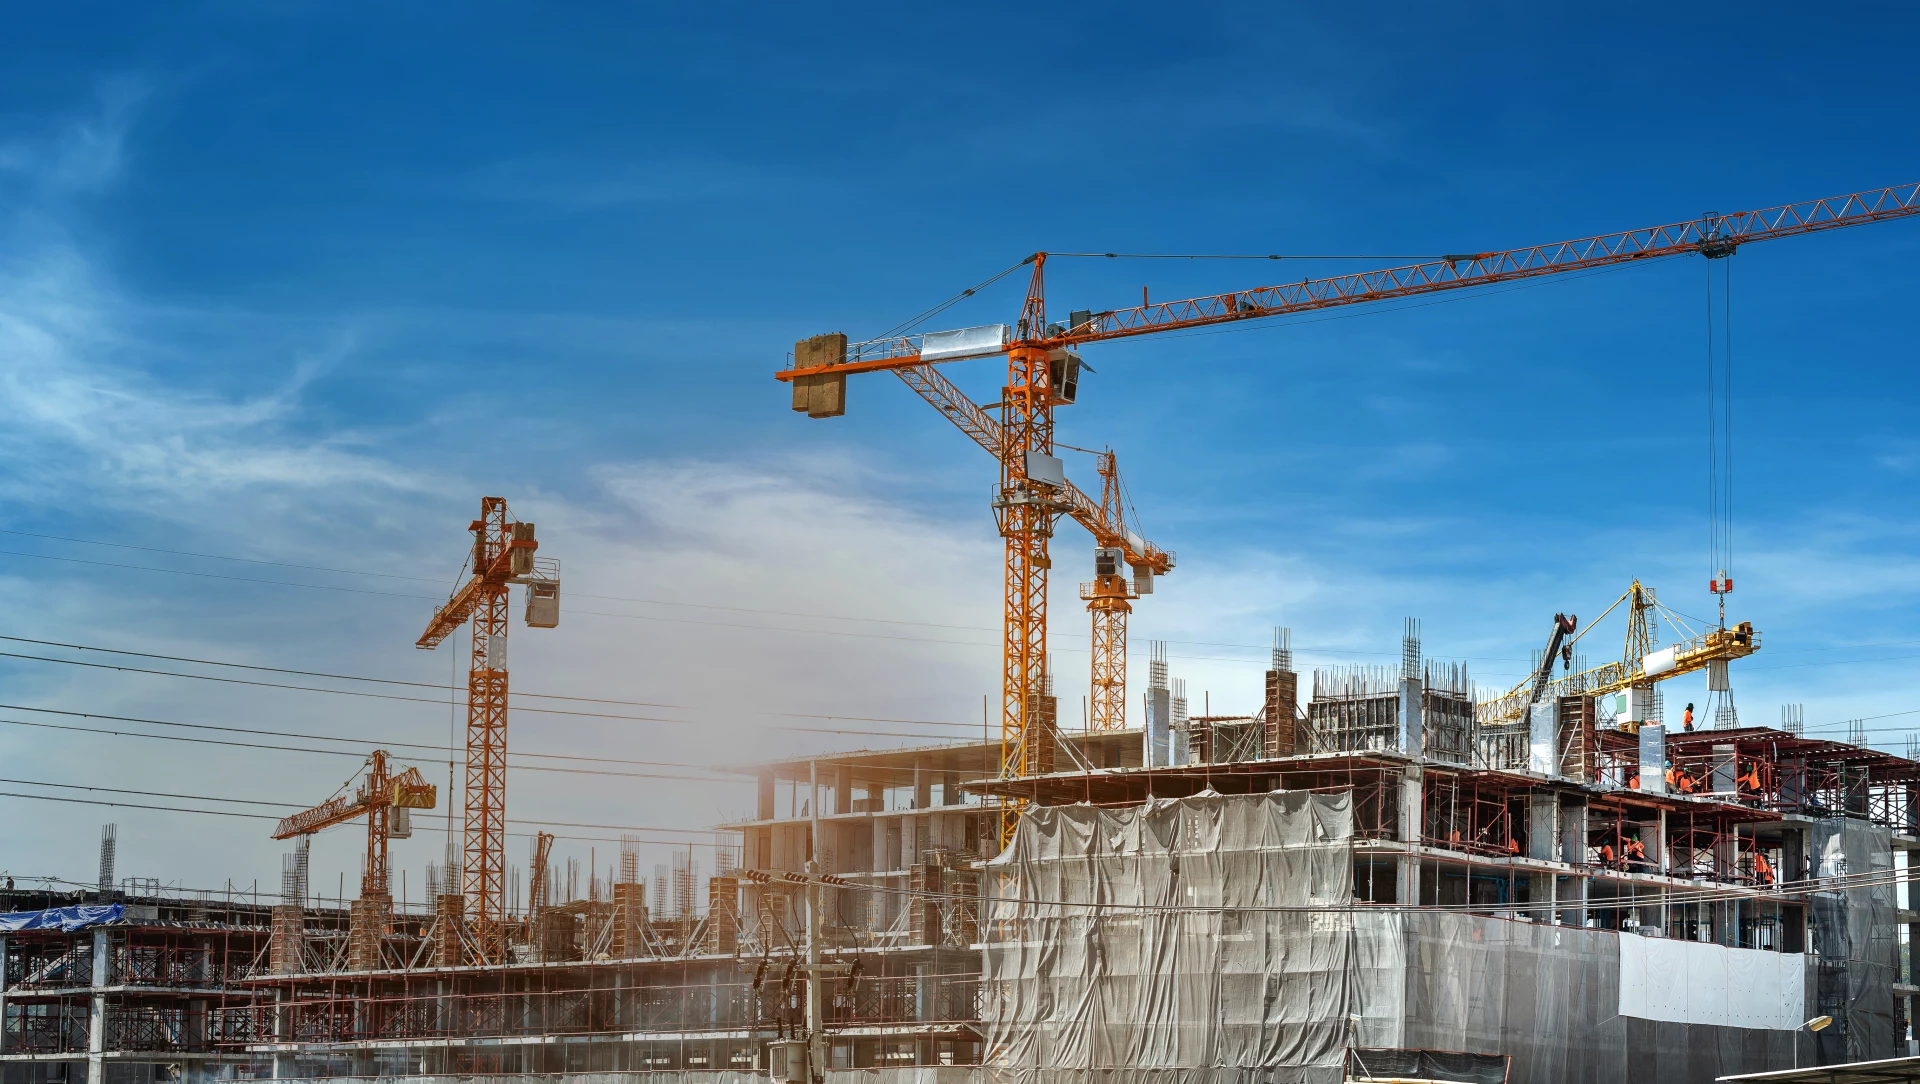 IoT for reducing risks in construction sites